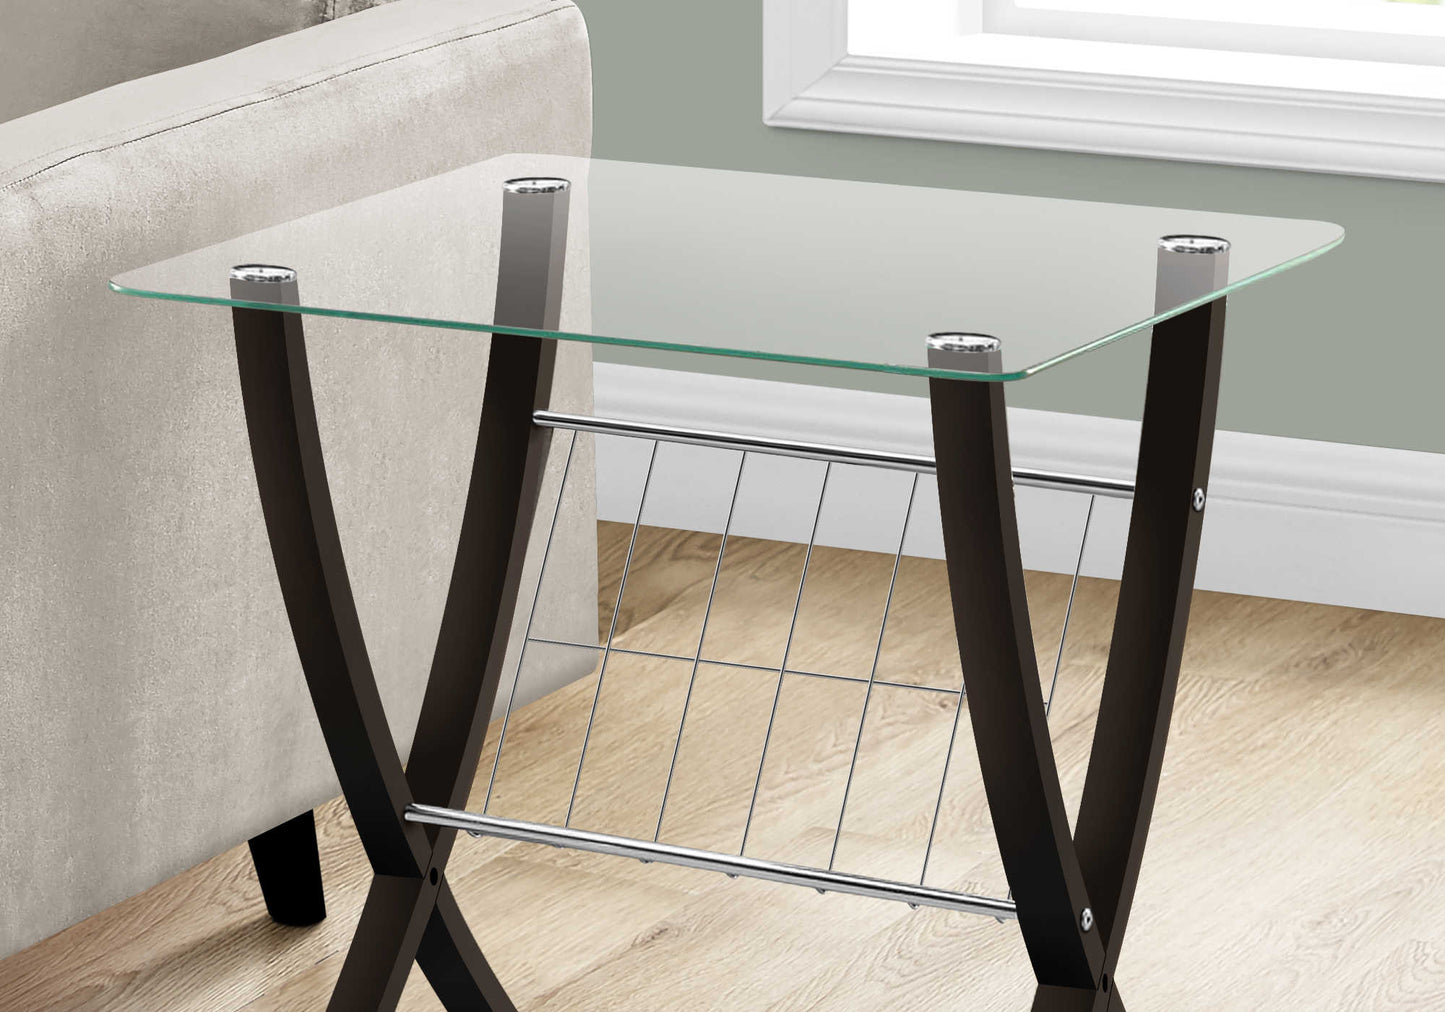 23.75” L/21.5” H Transitional Wood End Table with Wire Magazine Rack.